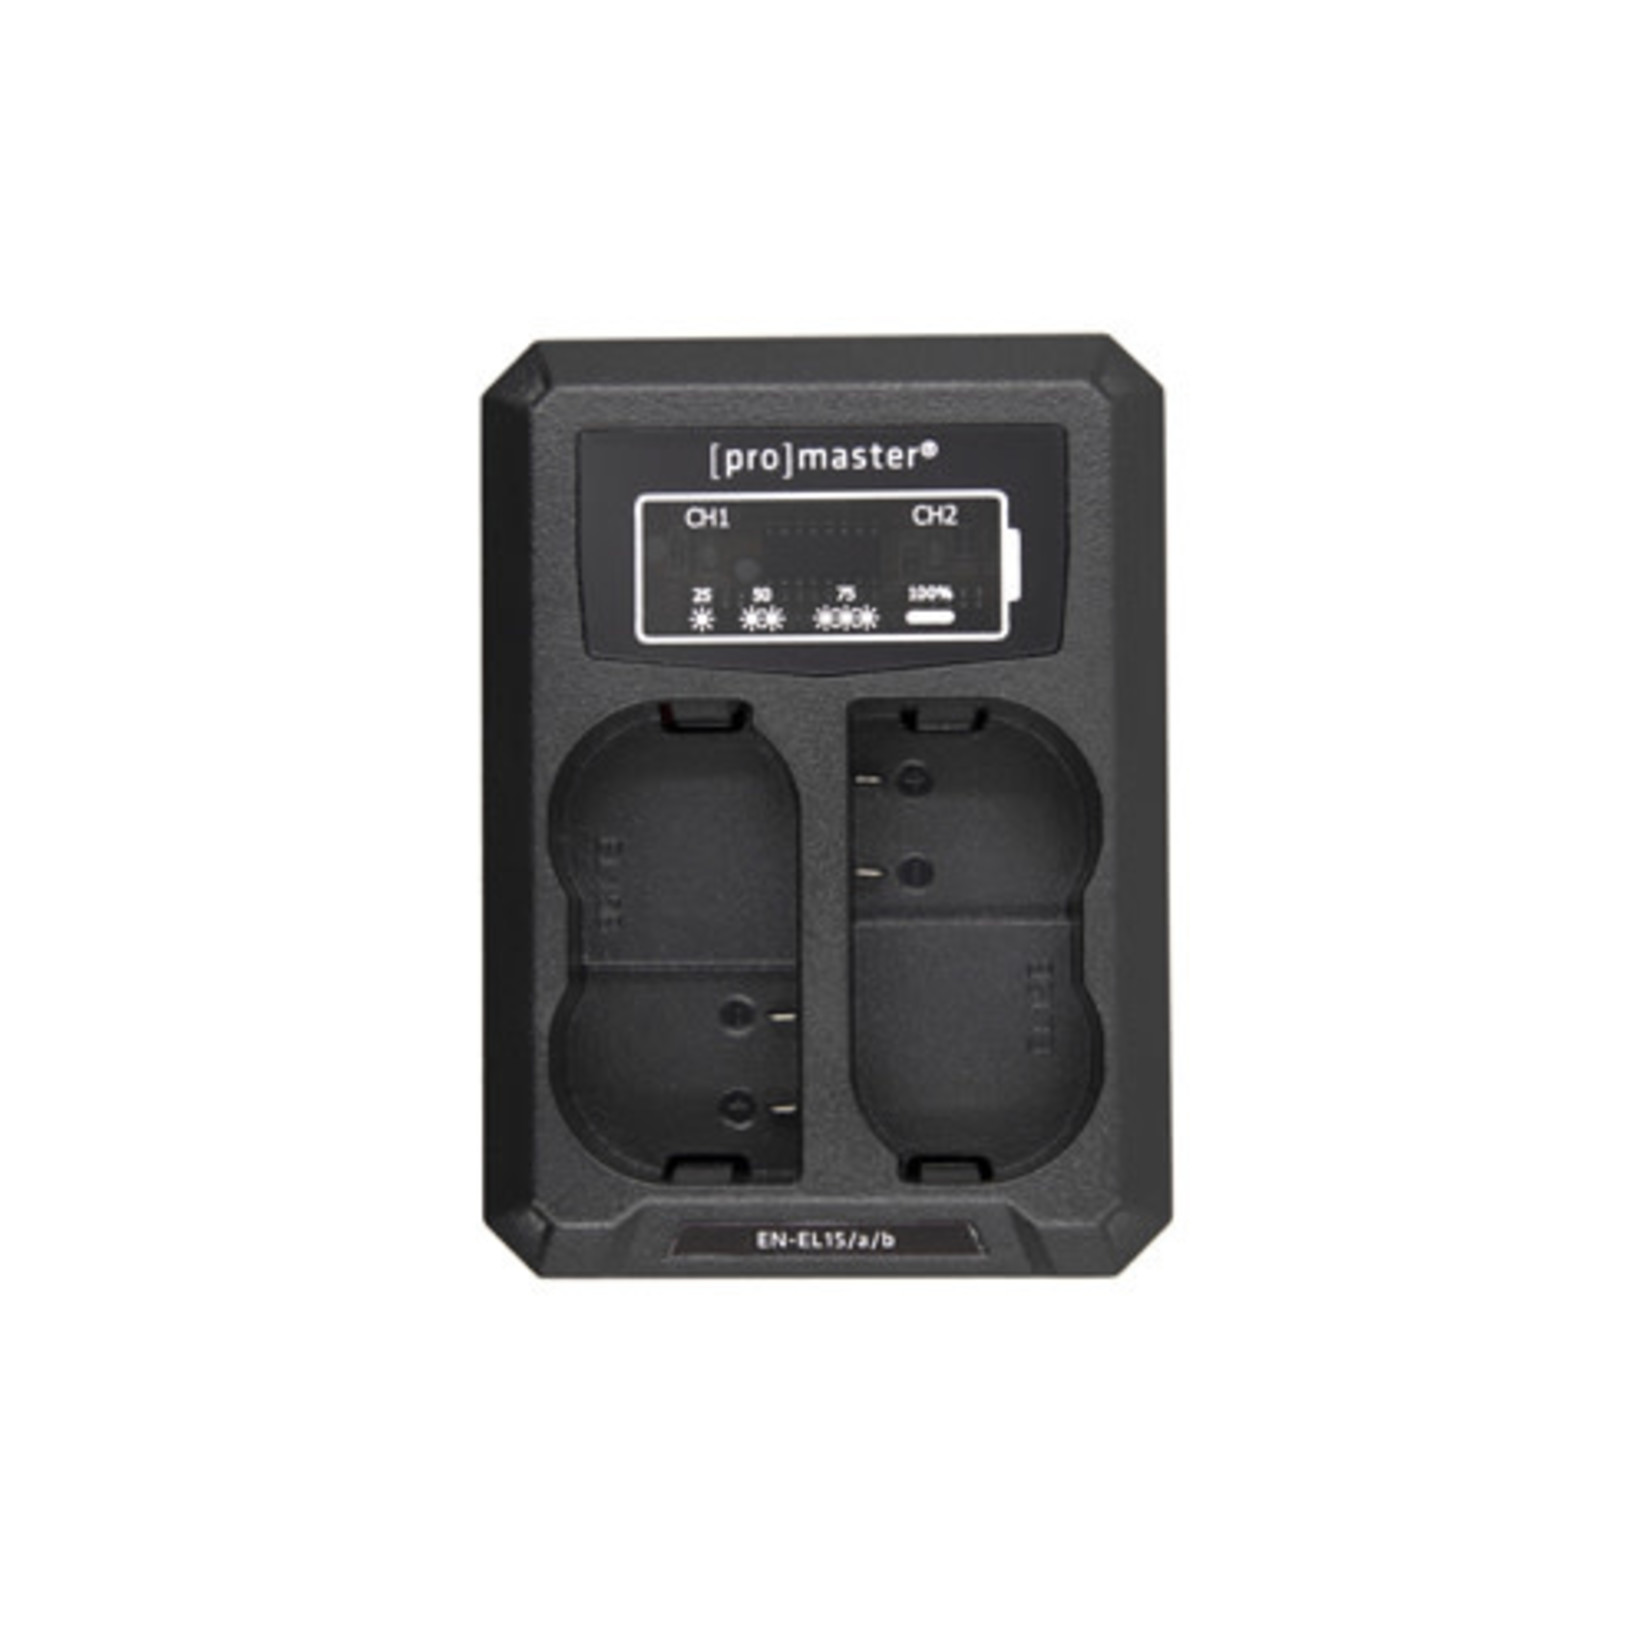 ProMaster ProMaster Dually Charger - USB for all Nikon EN-EL15 batteries